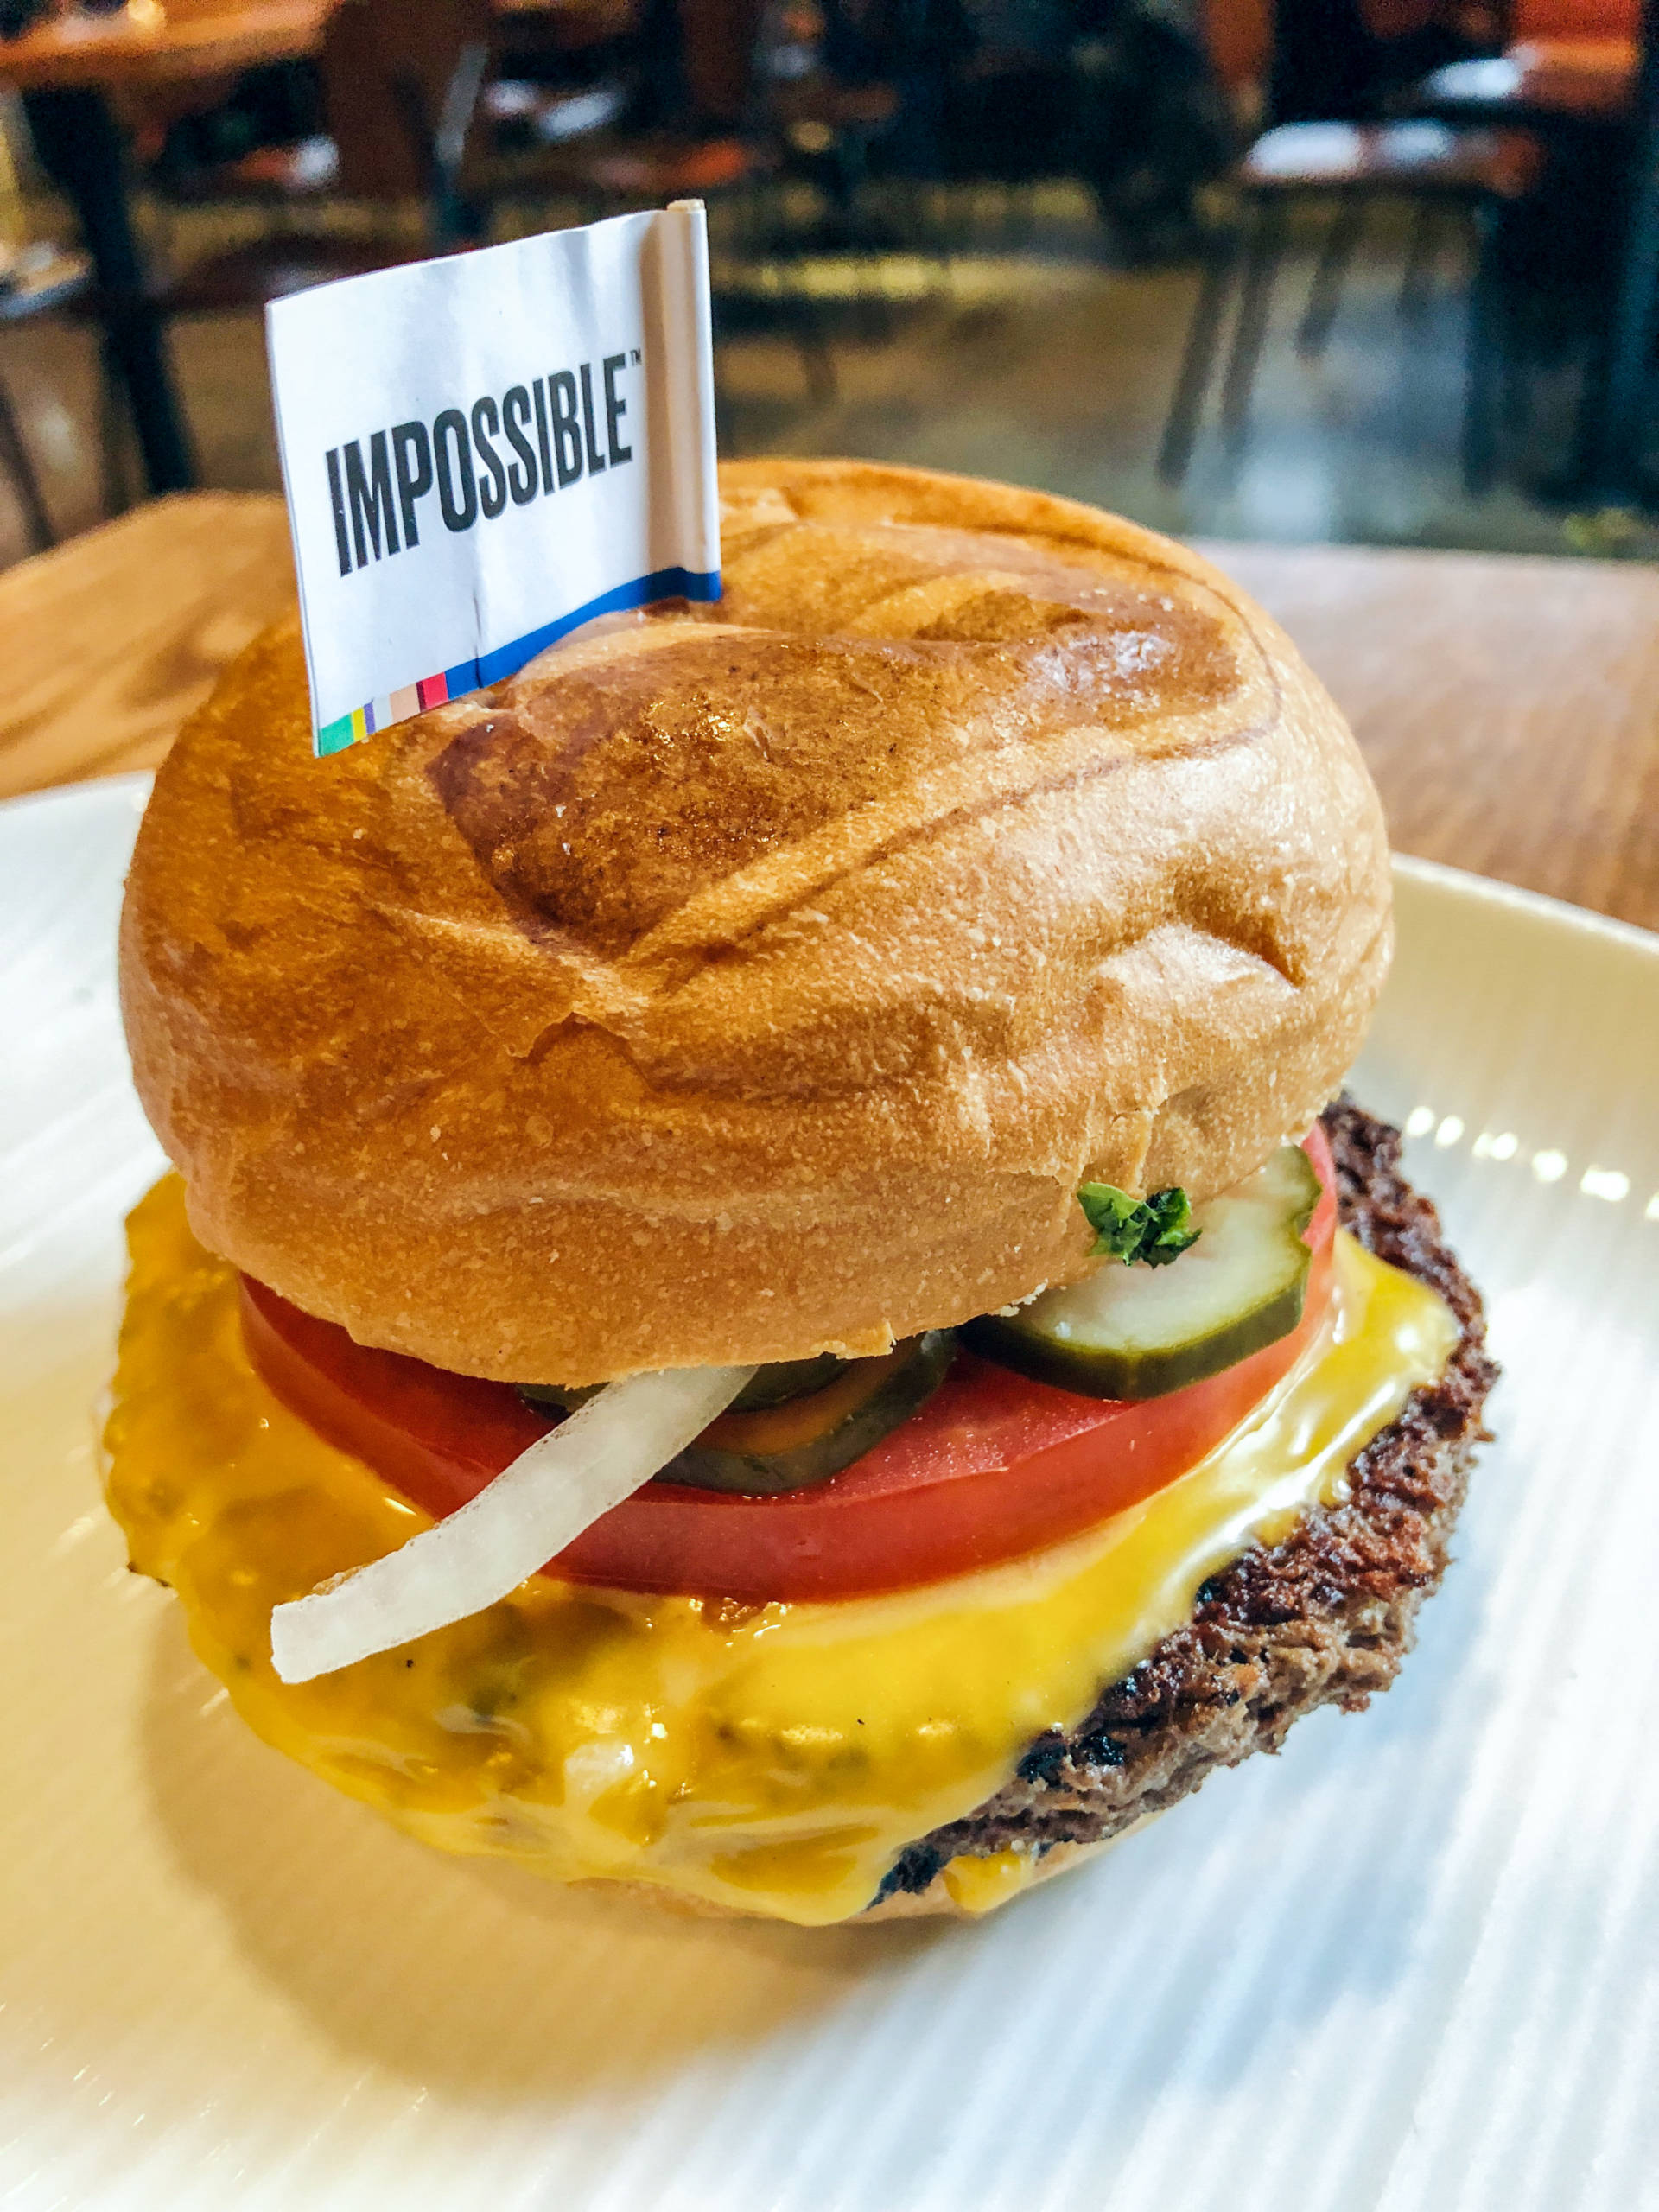 The Impossible Burger can be found at restaurants like Umami Burger